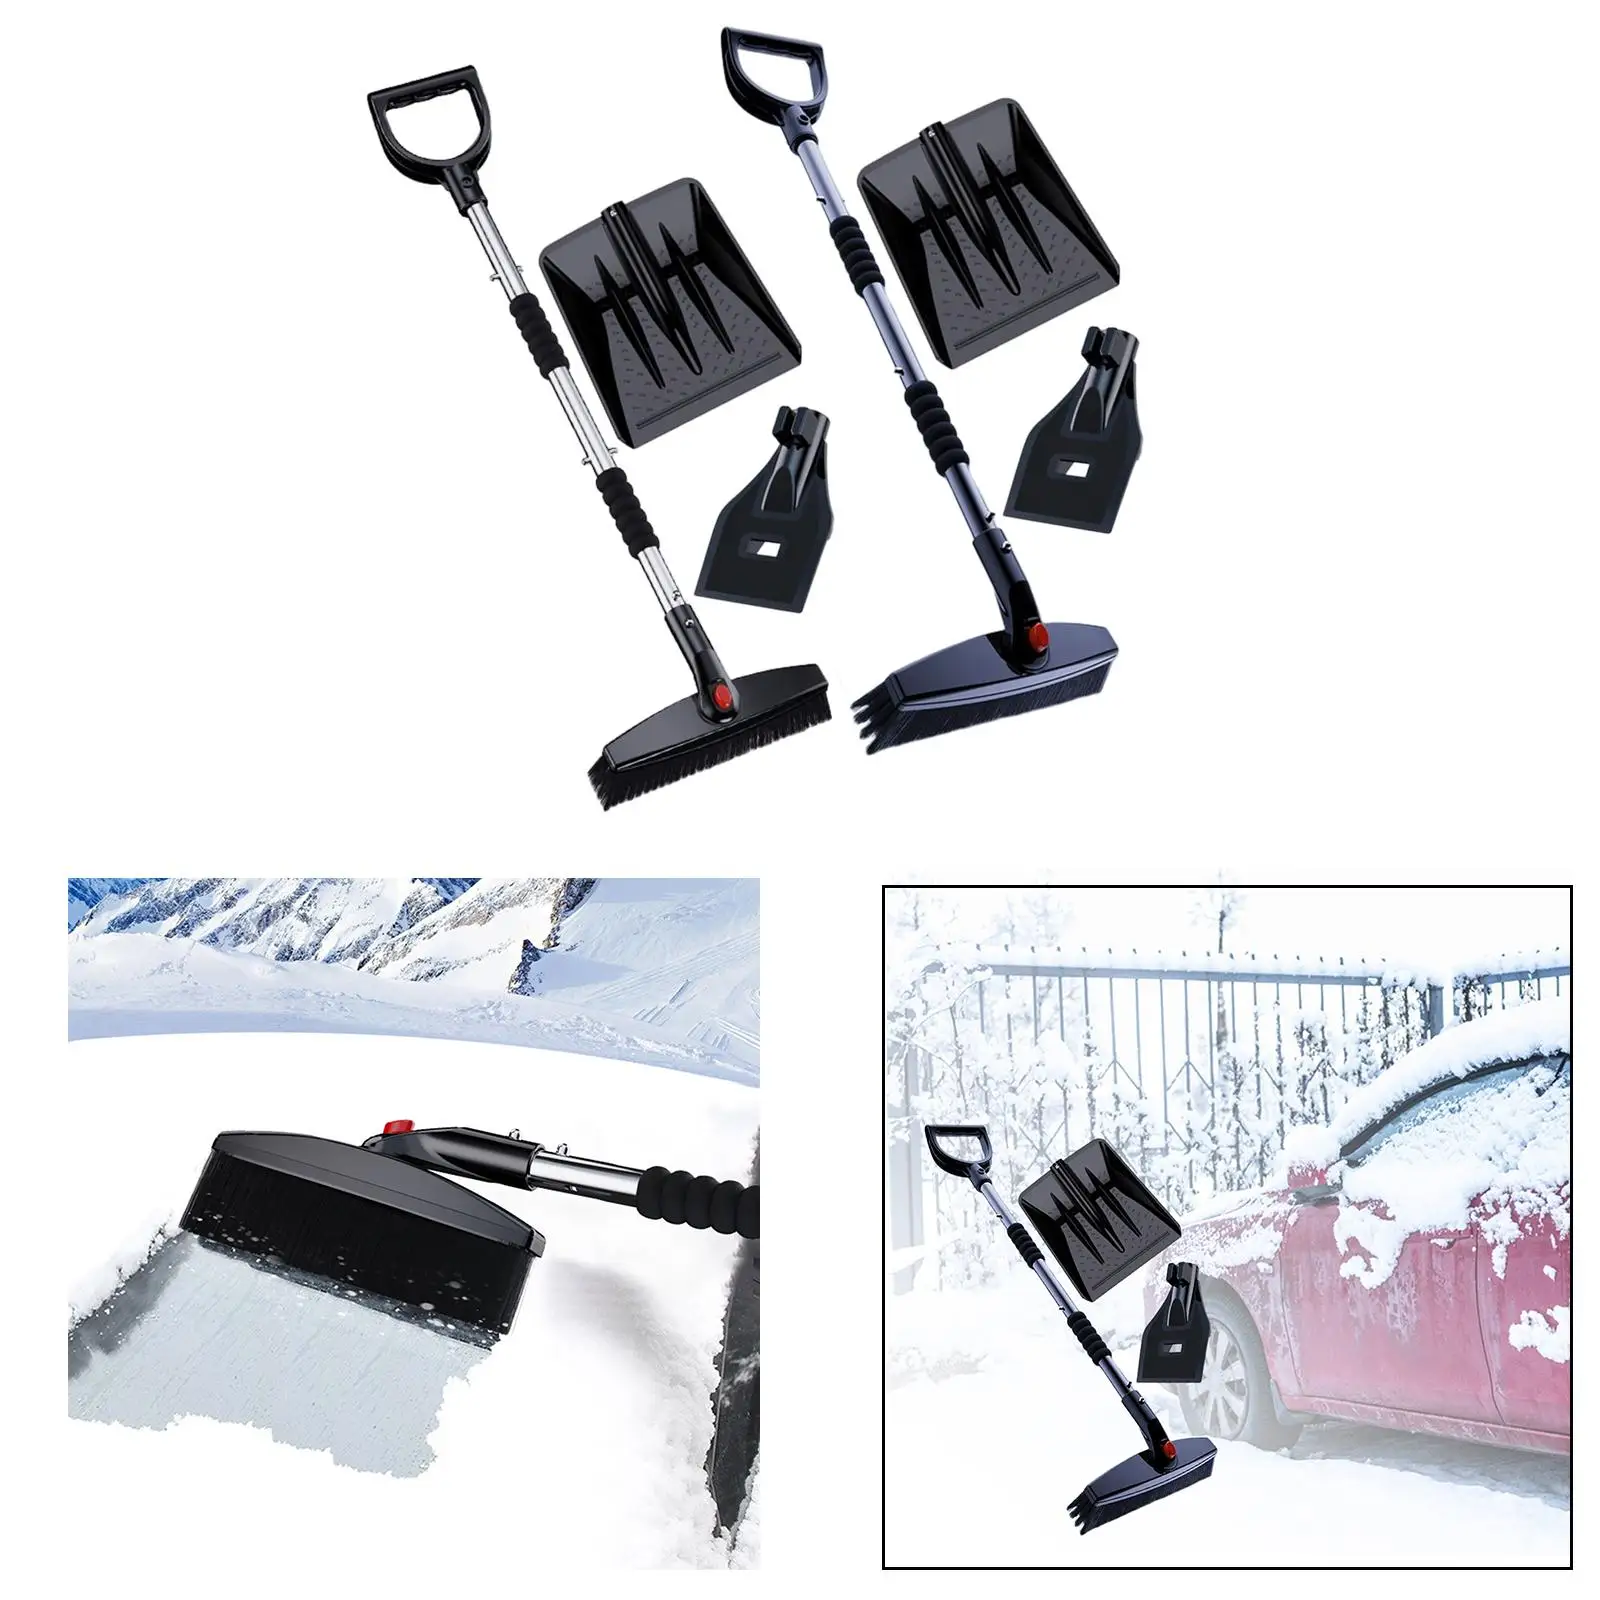 Portable Snow Removal Tool car Window Snow Cleaner Stainless Steel Handle 360 Rotatable Head for Truck Car Vehicles Auto